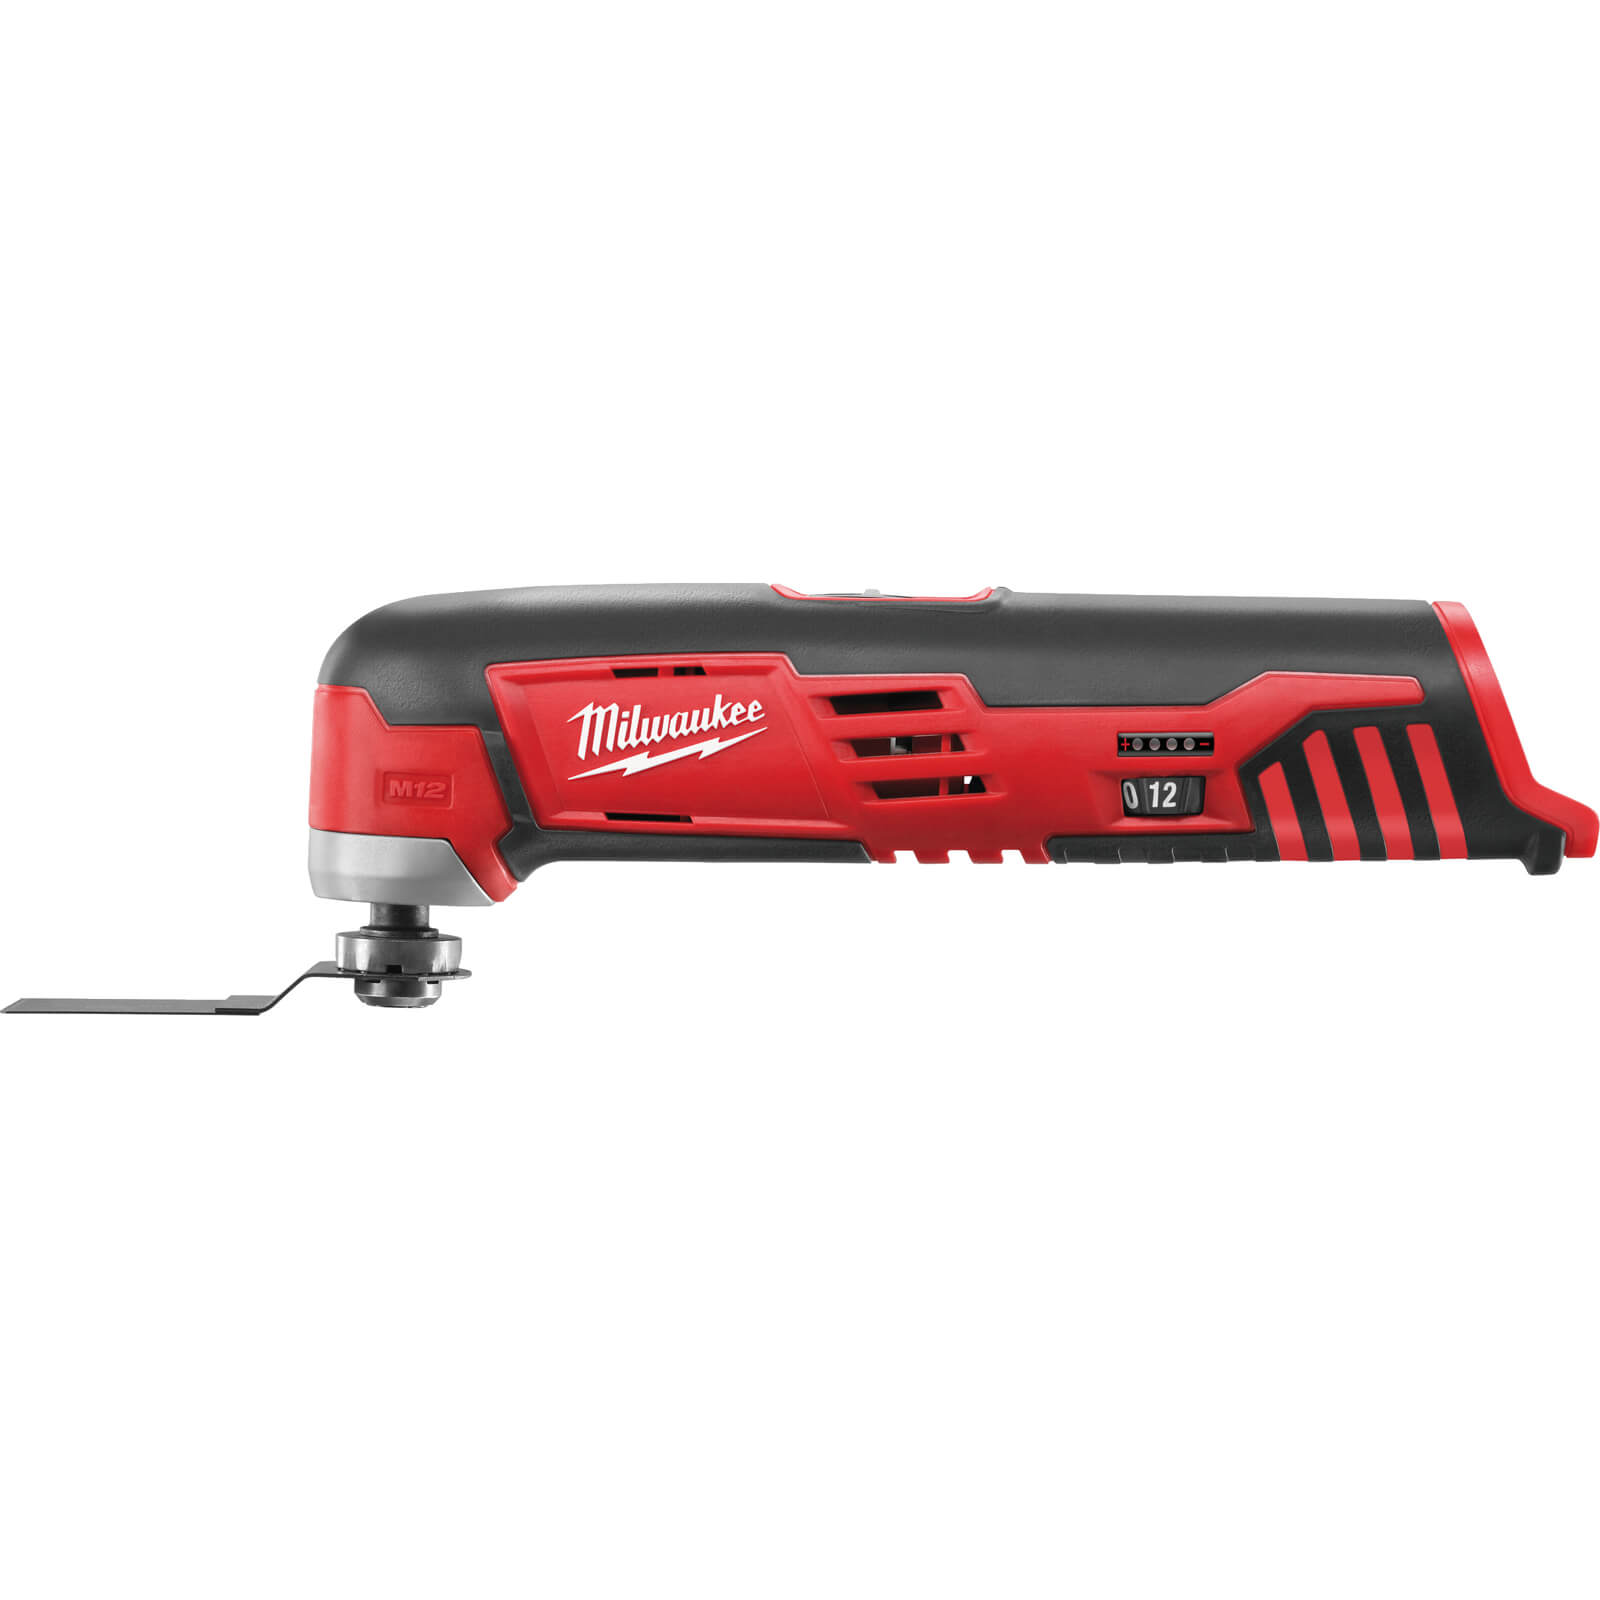 Milwaukee C12 MT 12v Cordless Compact Multi Tool No Batteries No Charger No Case